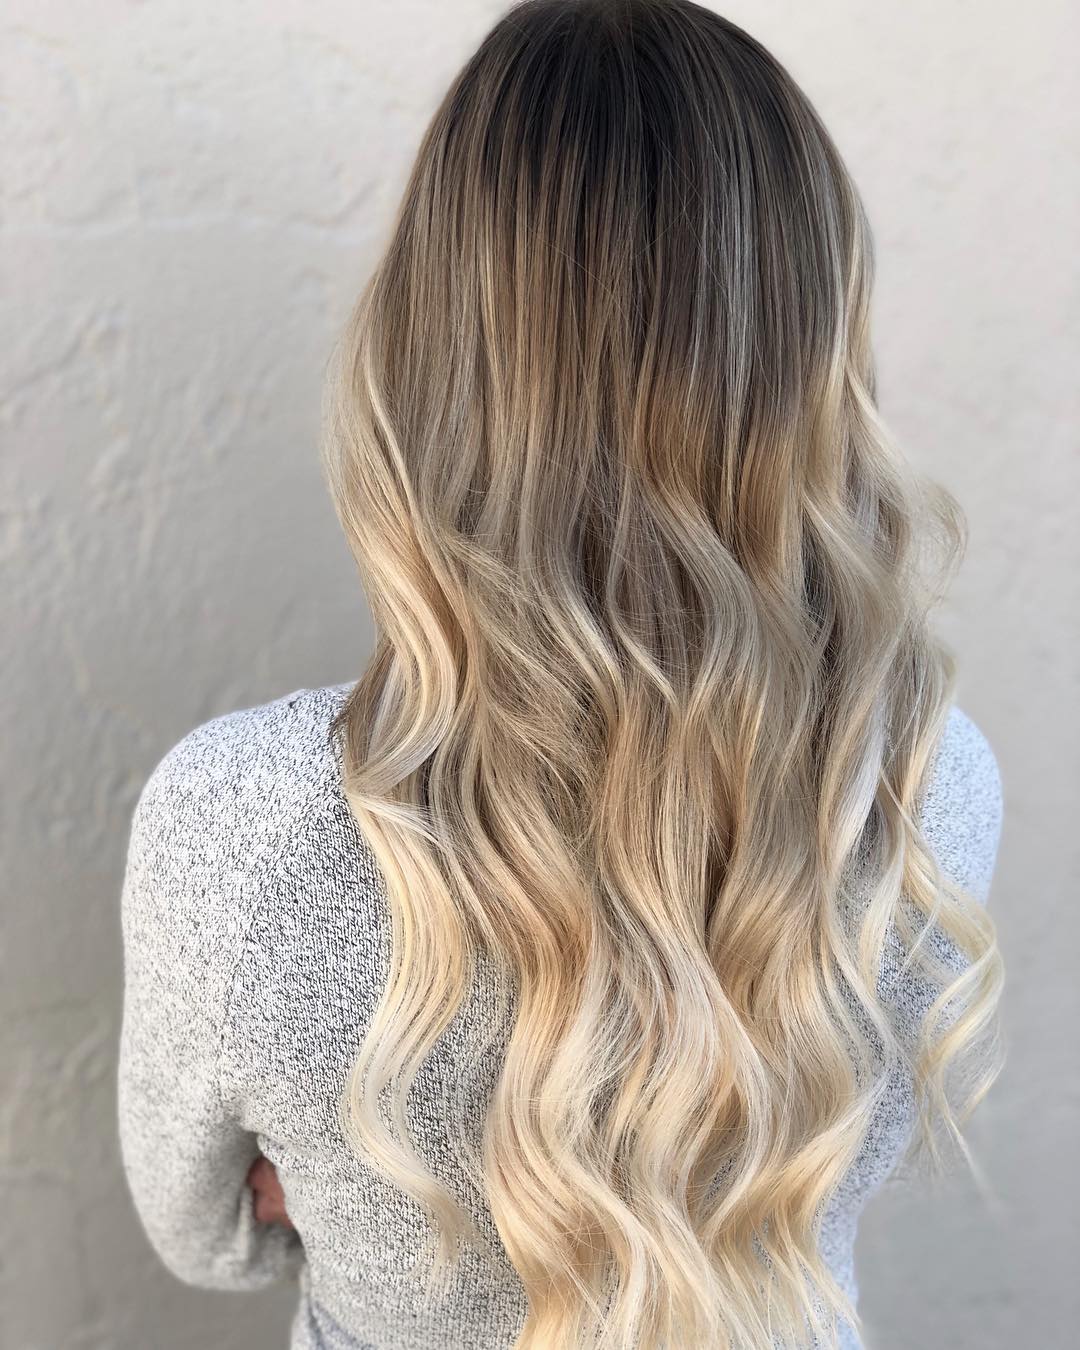 Best Ombré and Balayage Hairstyles 